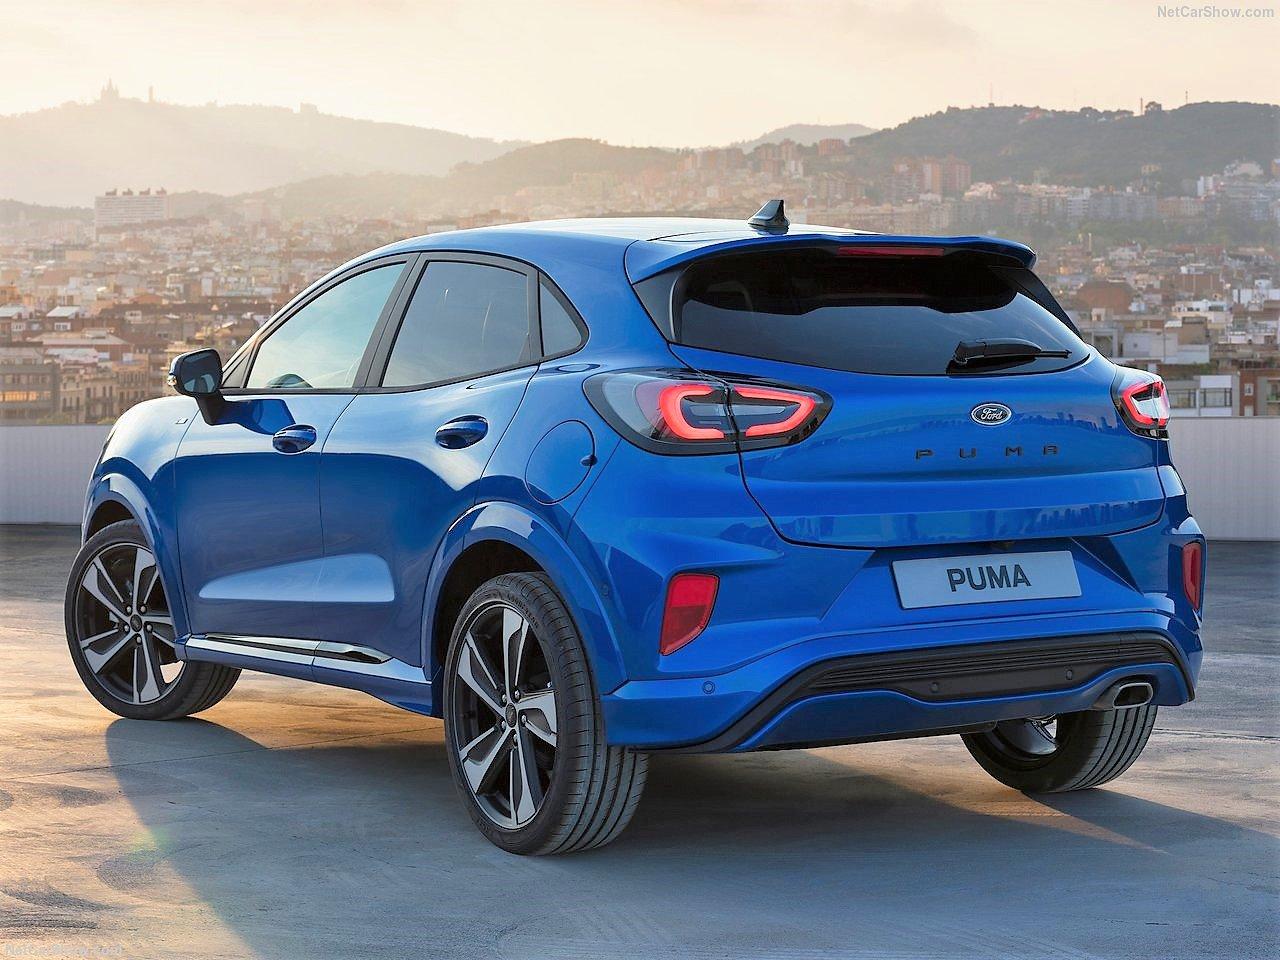 Manufacturer’s image of the rear of a Ford Puma.